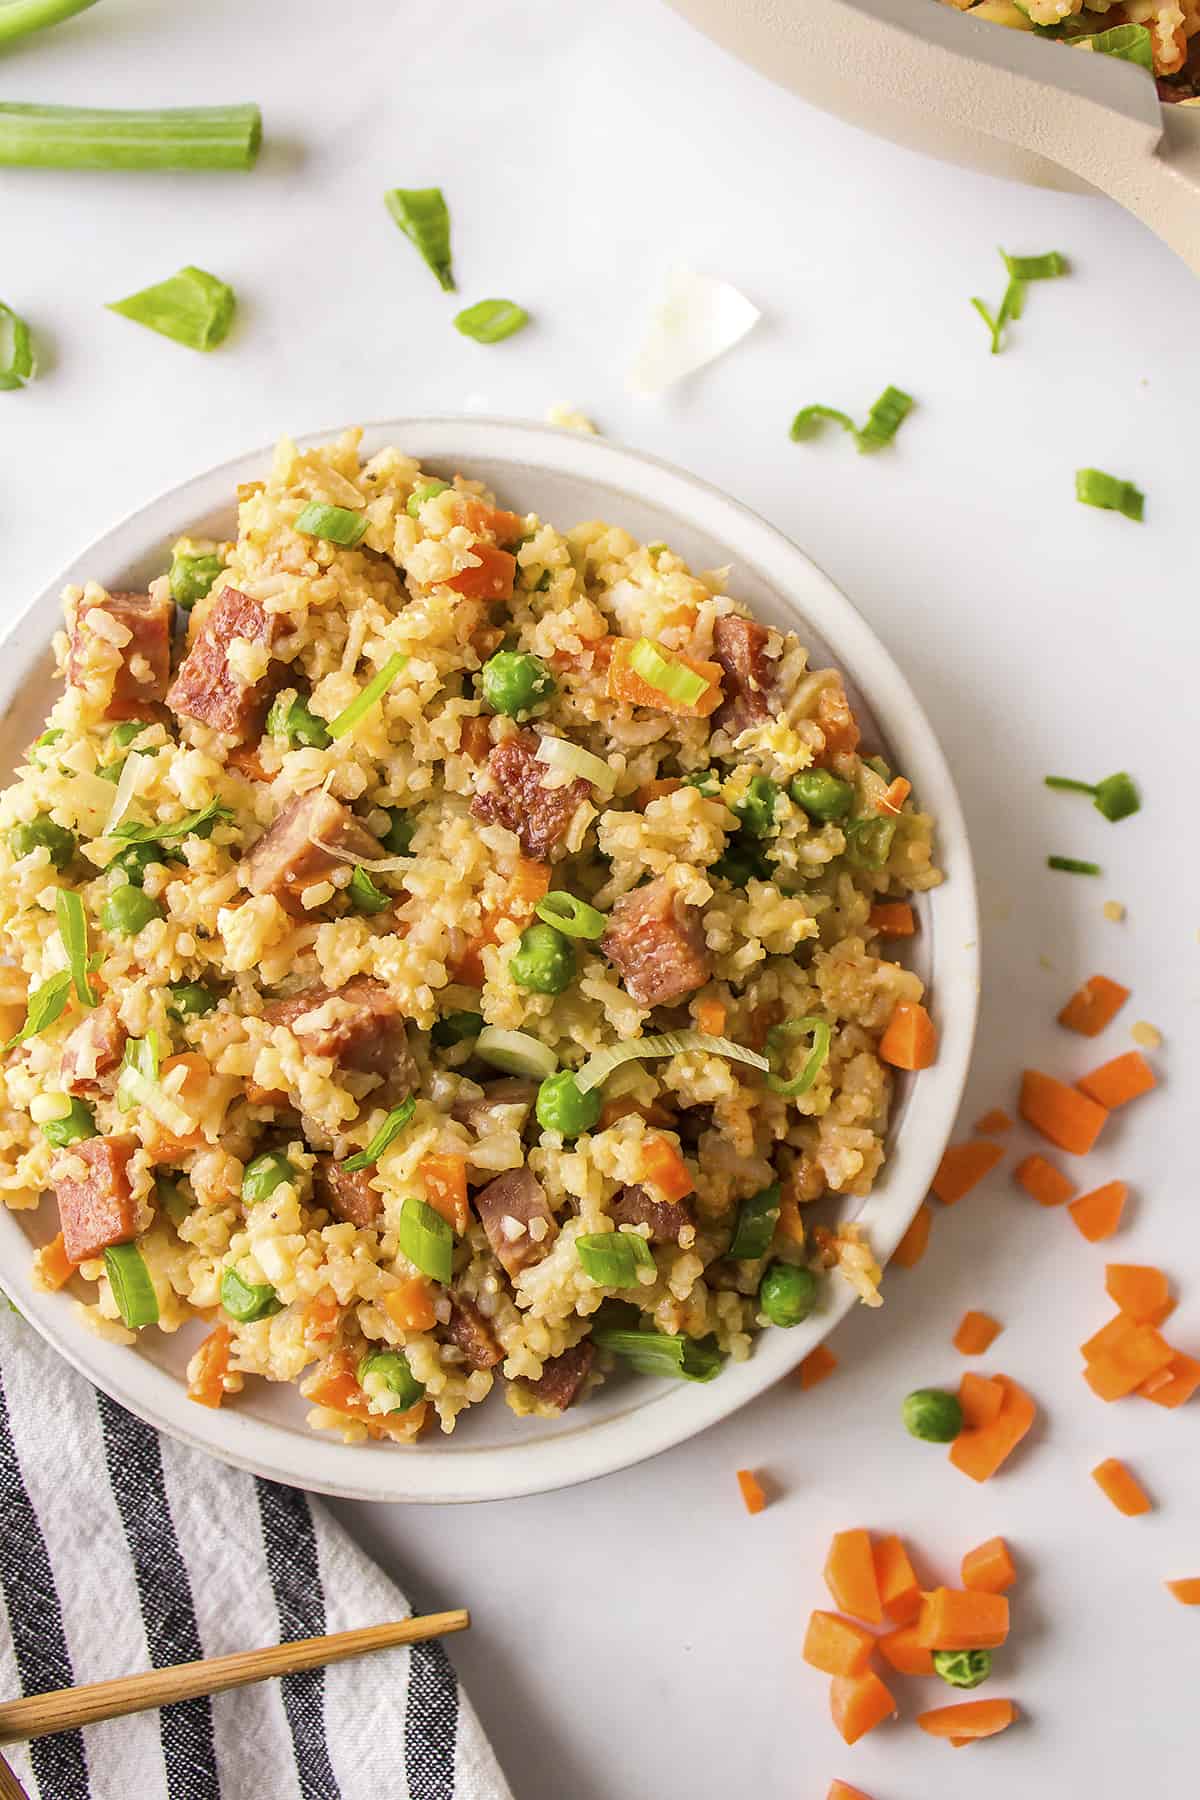 Spam fried rice in white bowl.